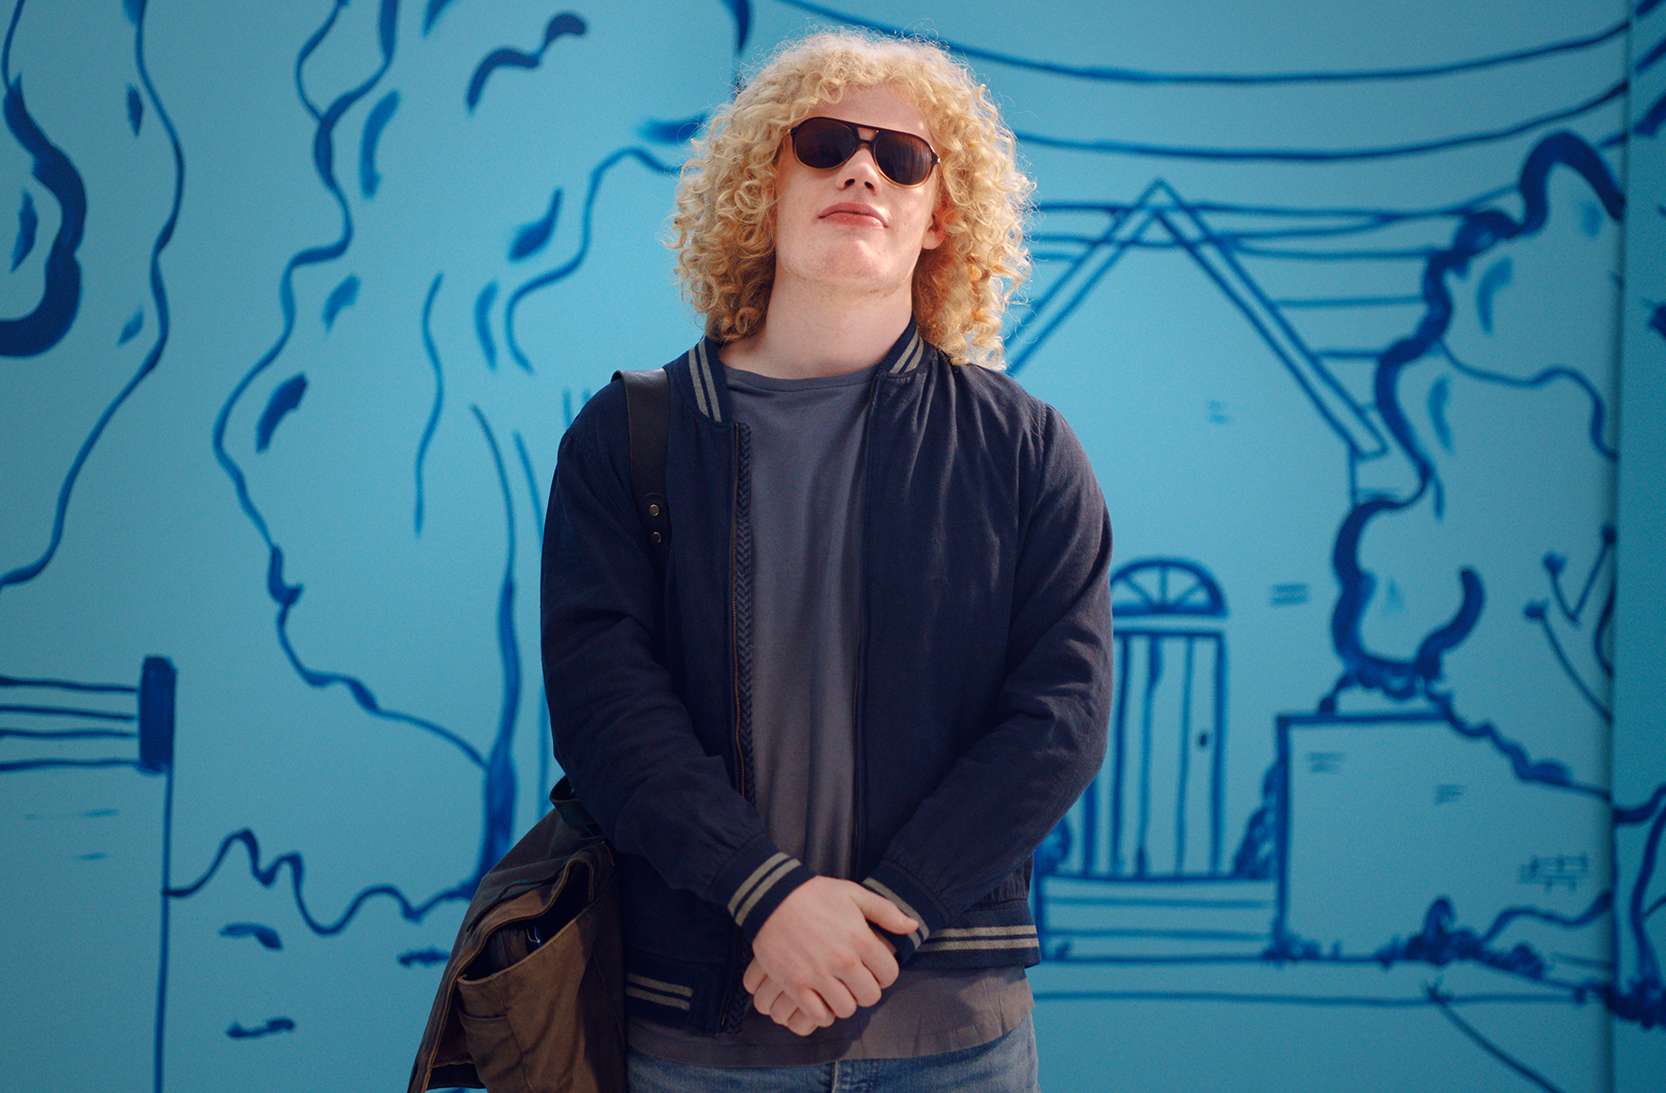 A young man with curly blonde hair dressed in jeans and a bomber jacket stands proudly with his hands folded in front of him, wearing sunglasses. He is standing in front of a painted light blue and navy outdoor scene.